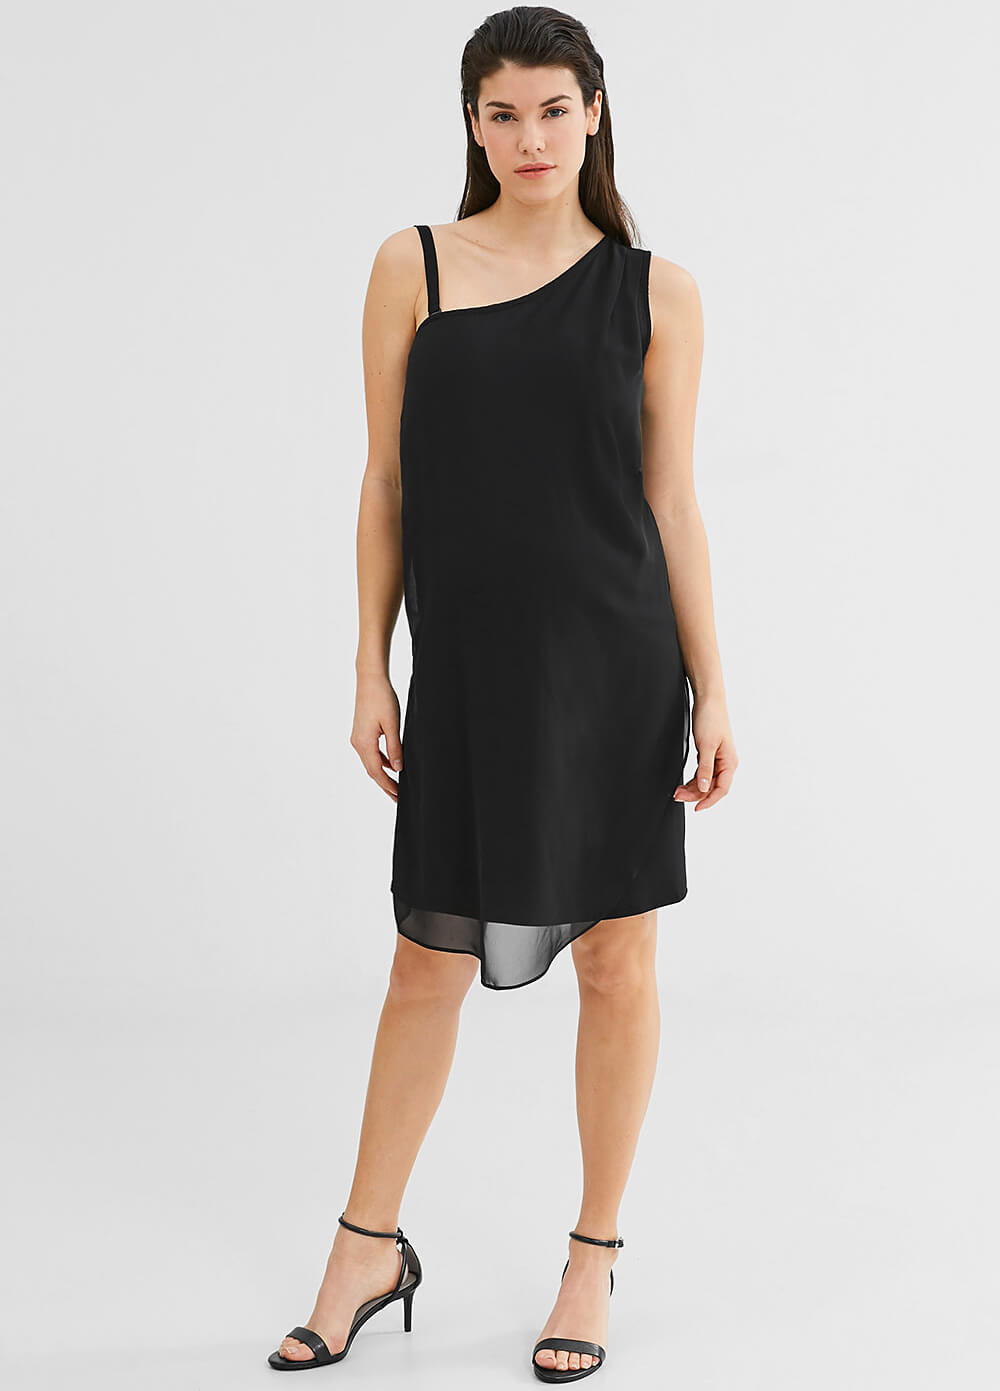 One-Shouldered Maternity Party Dress in Black by Esprit